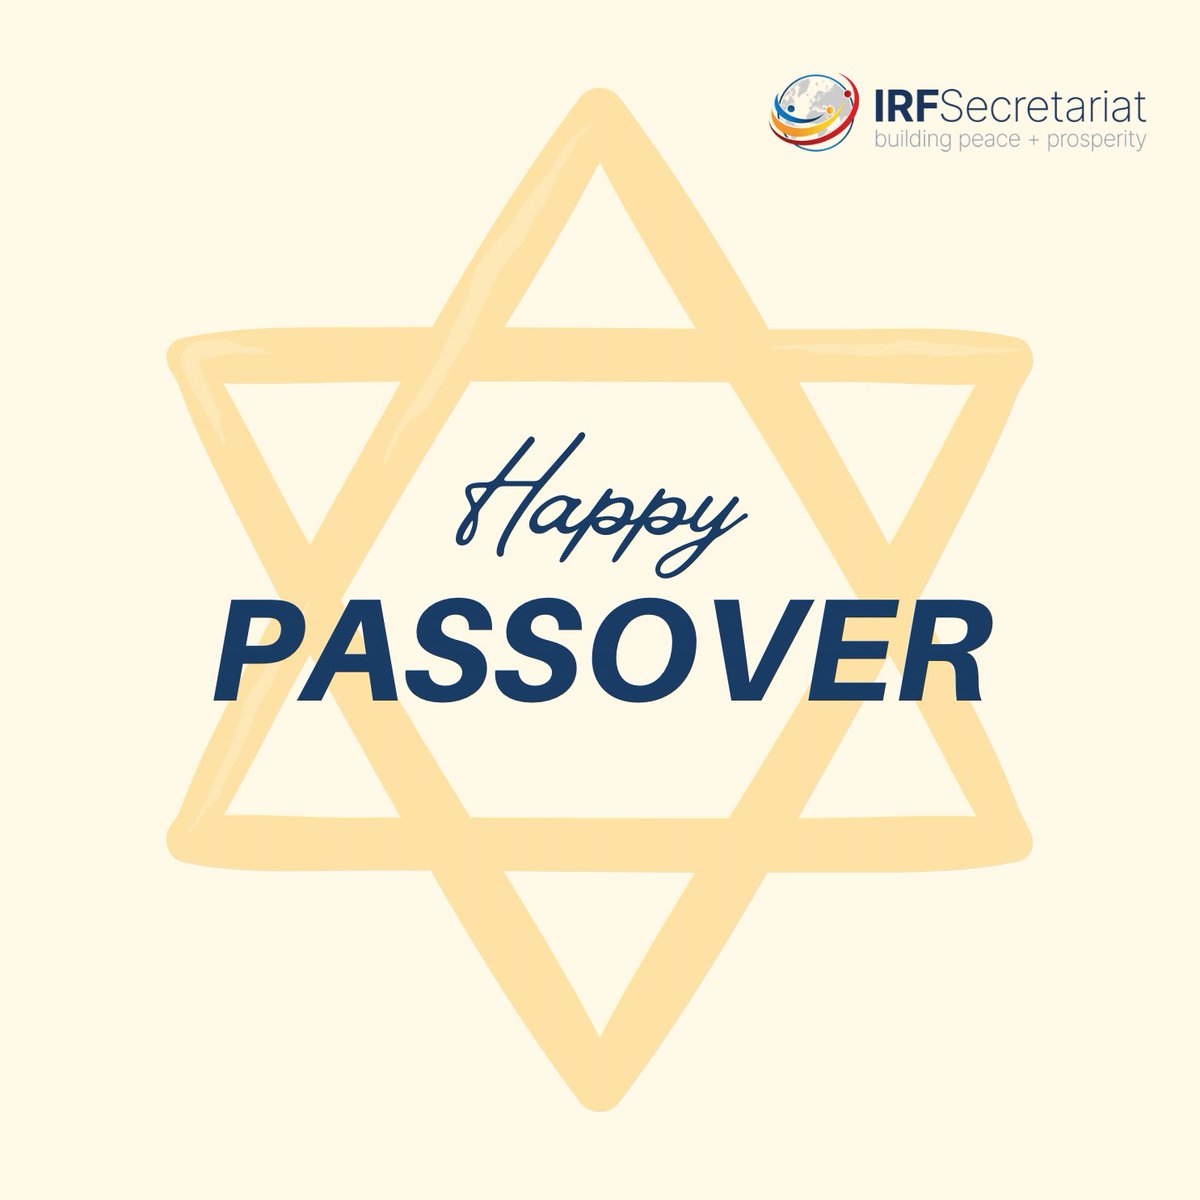 Passover: a time of reflection, liberation, and tradition. As families gather around the Seder table, may the spirit of freedom and renewal shine bright. #Passover #Tradition #Freedom